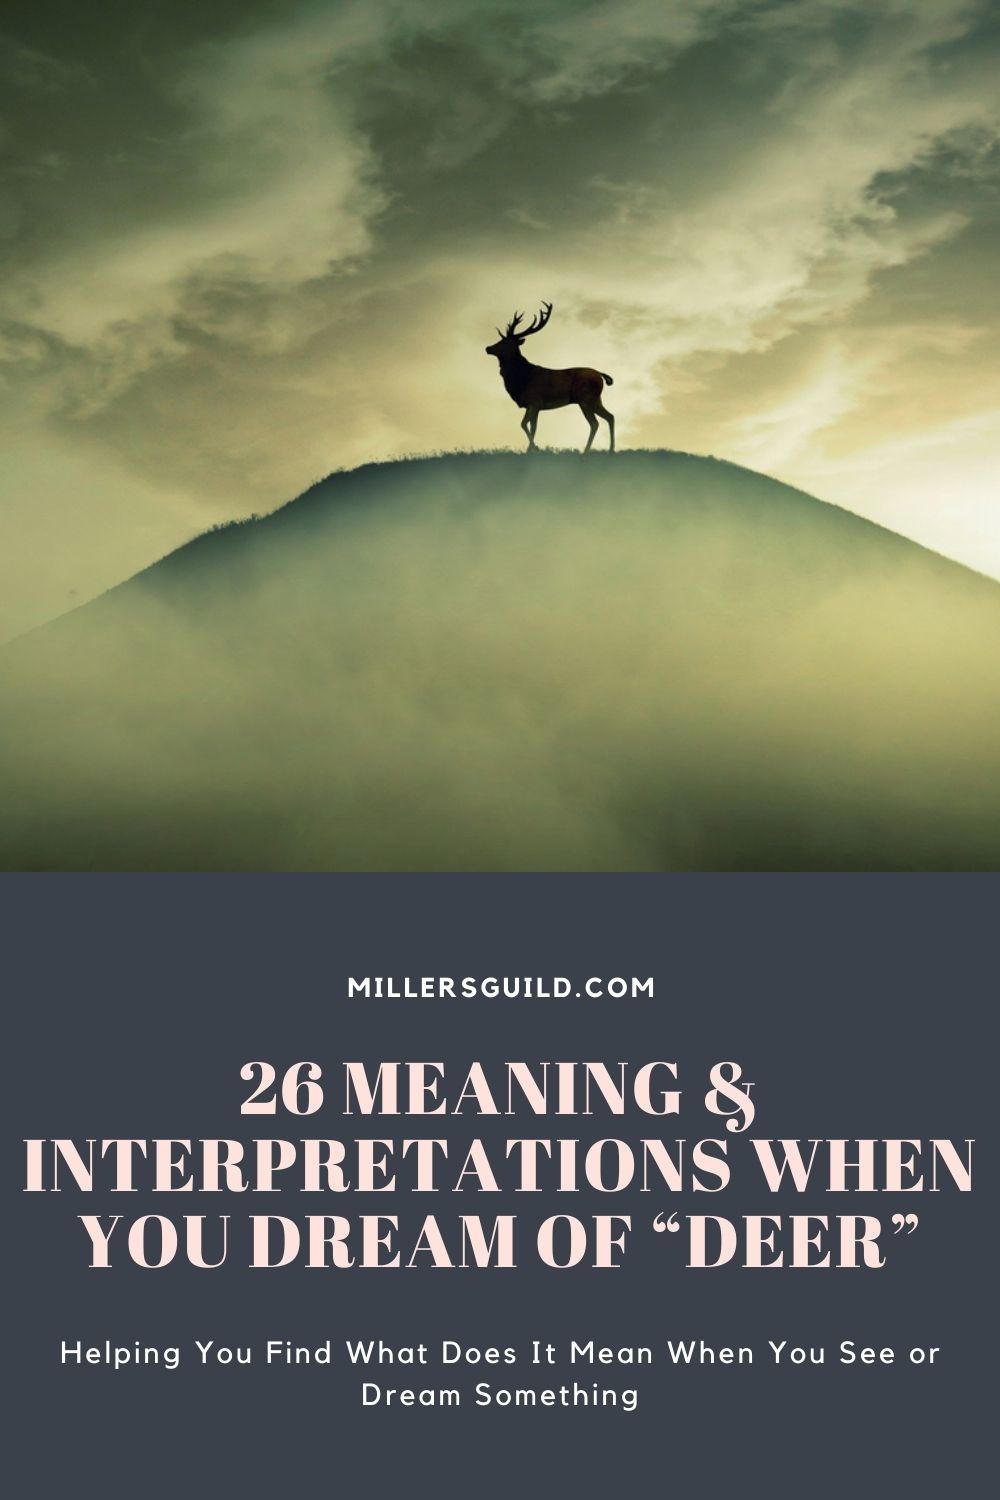 26 Meaning & Interpretations When You Dream Of “Deer” 2